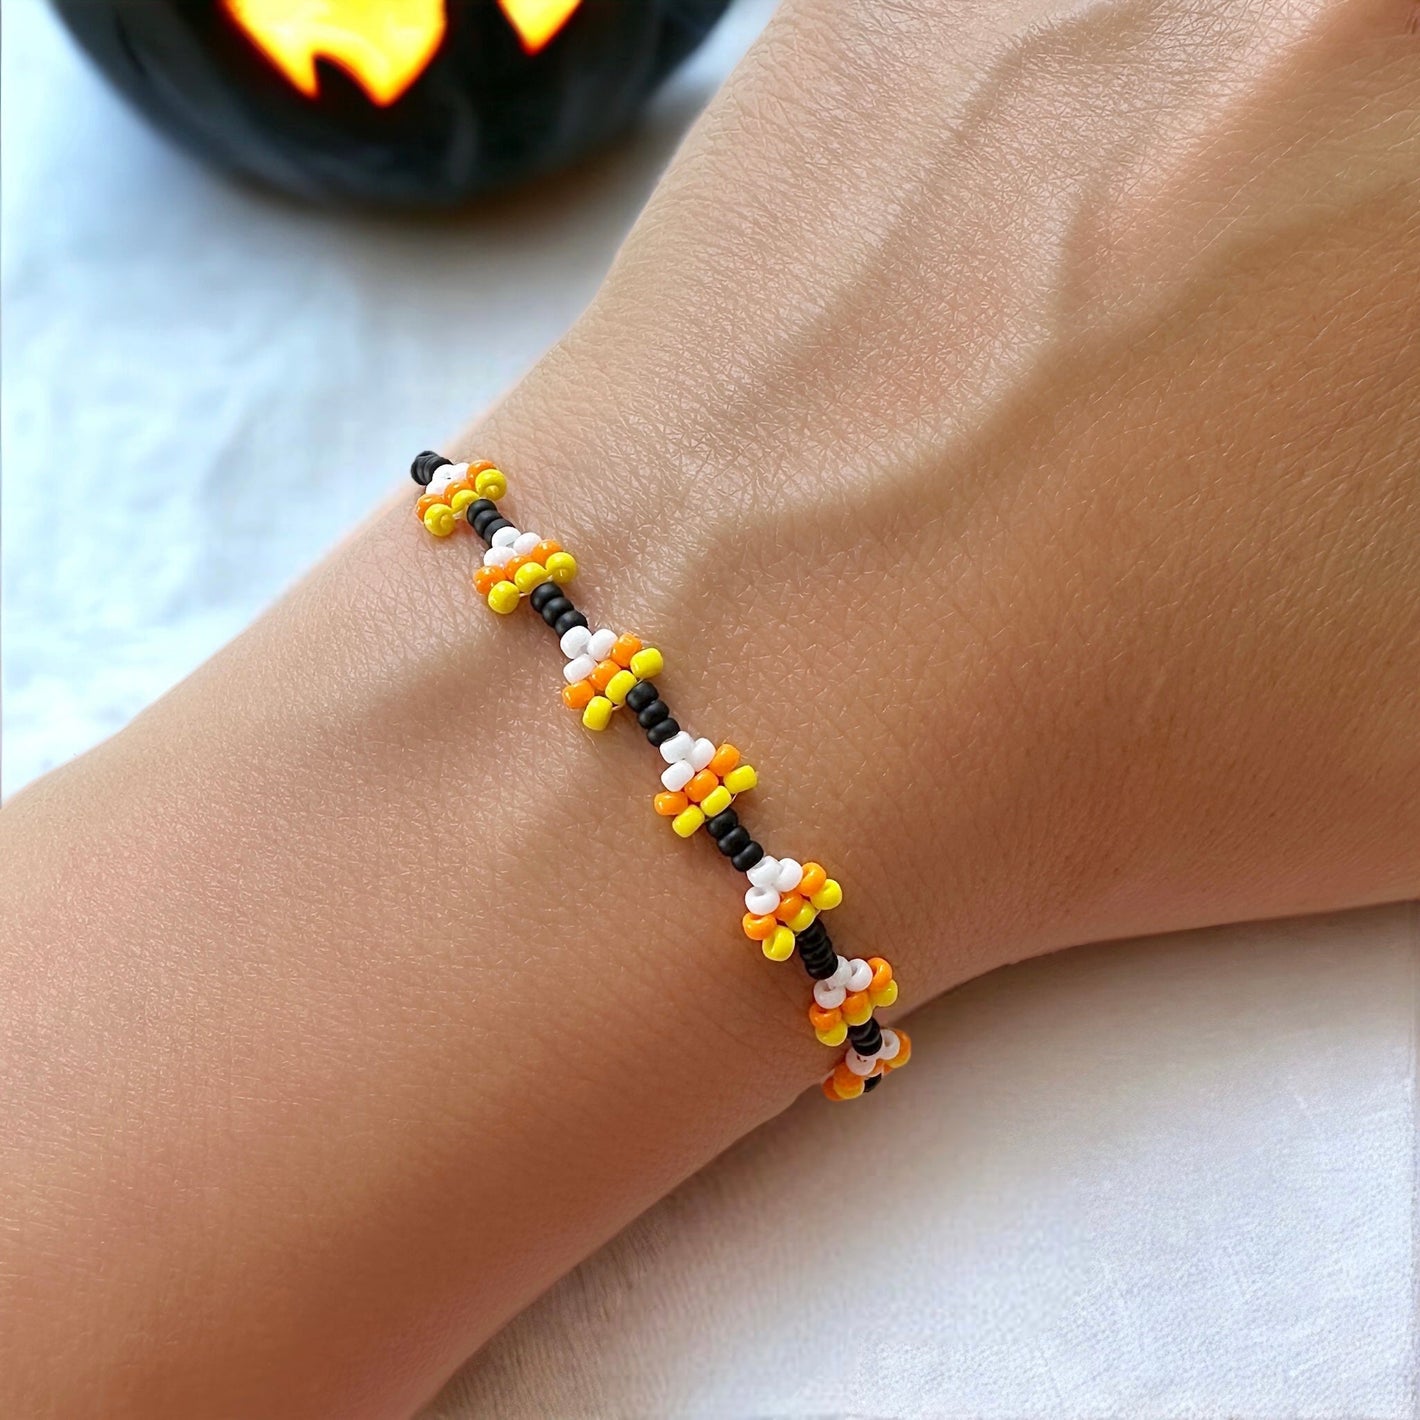 Beaded candy corn chain bracelet on a woman's wrist with a white cloth in the background